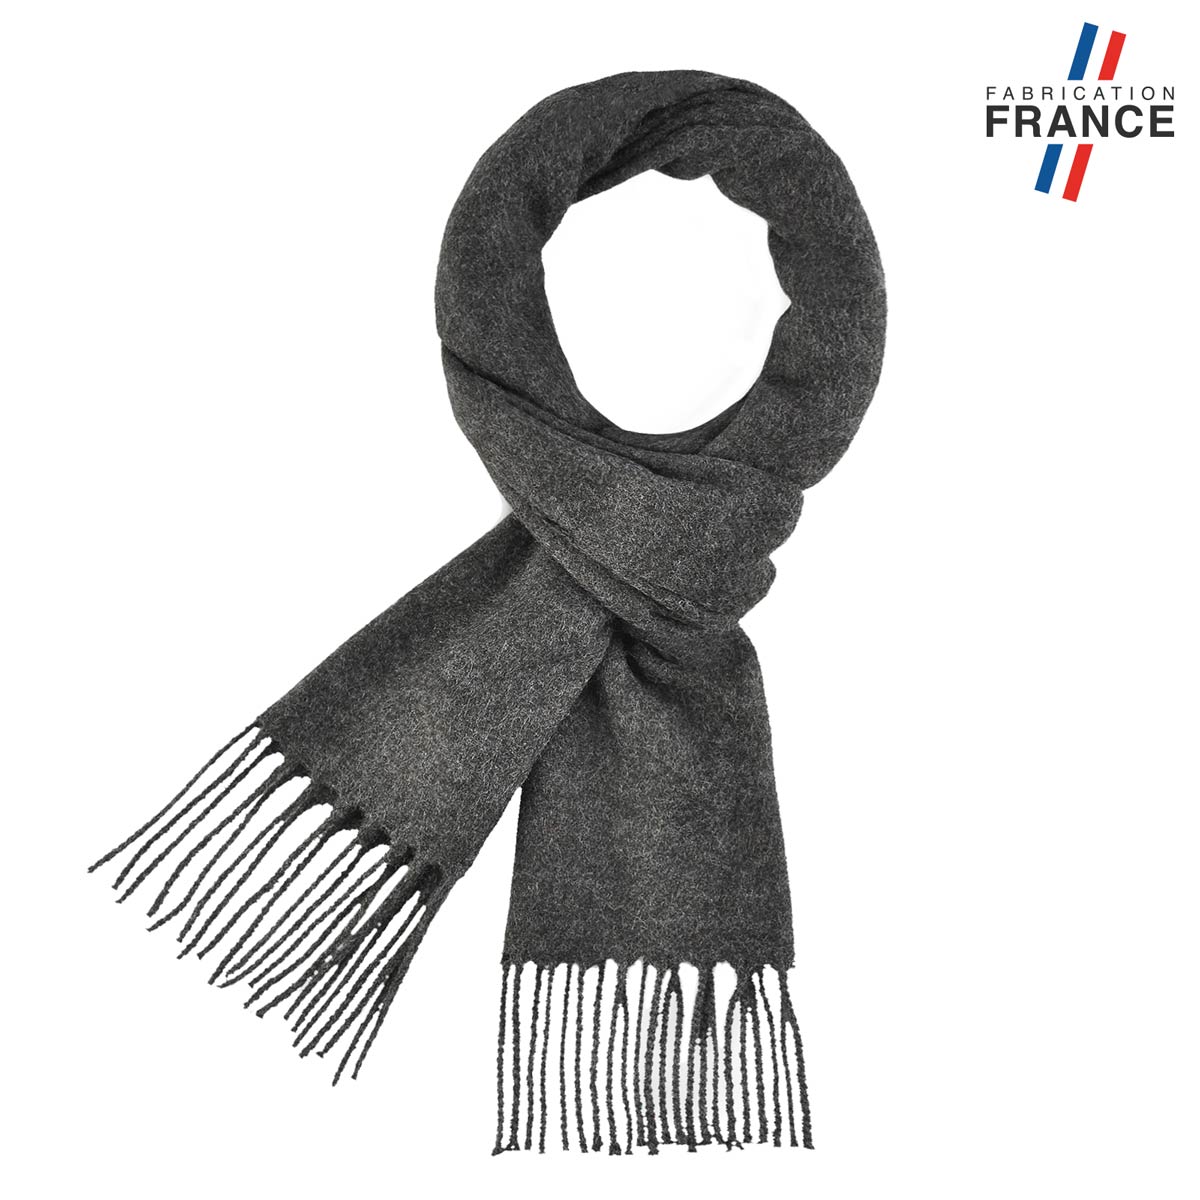 AT-05122_F12-1FR_Echarpe-a-franges-gris-anthracite-fabrication-francaise